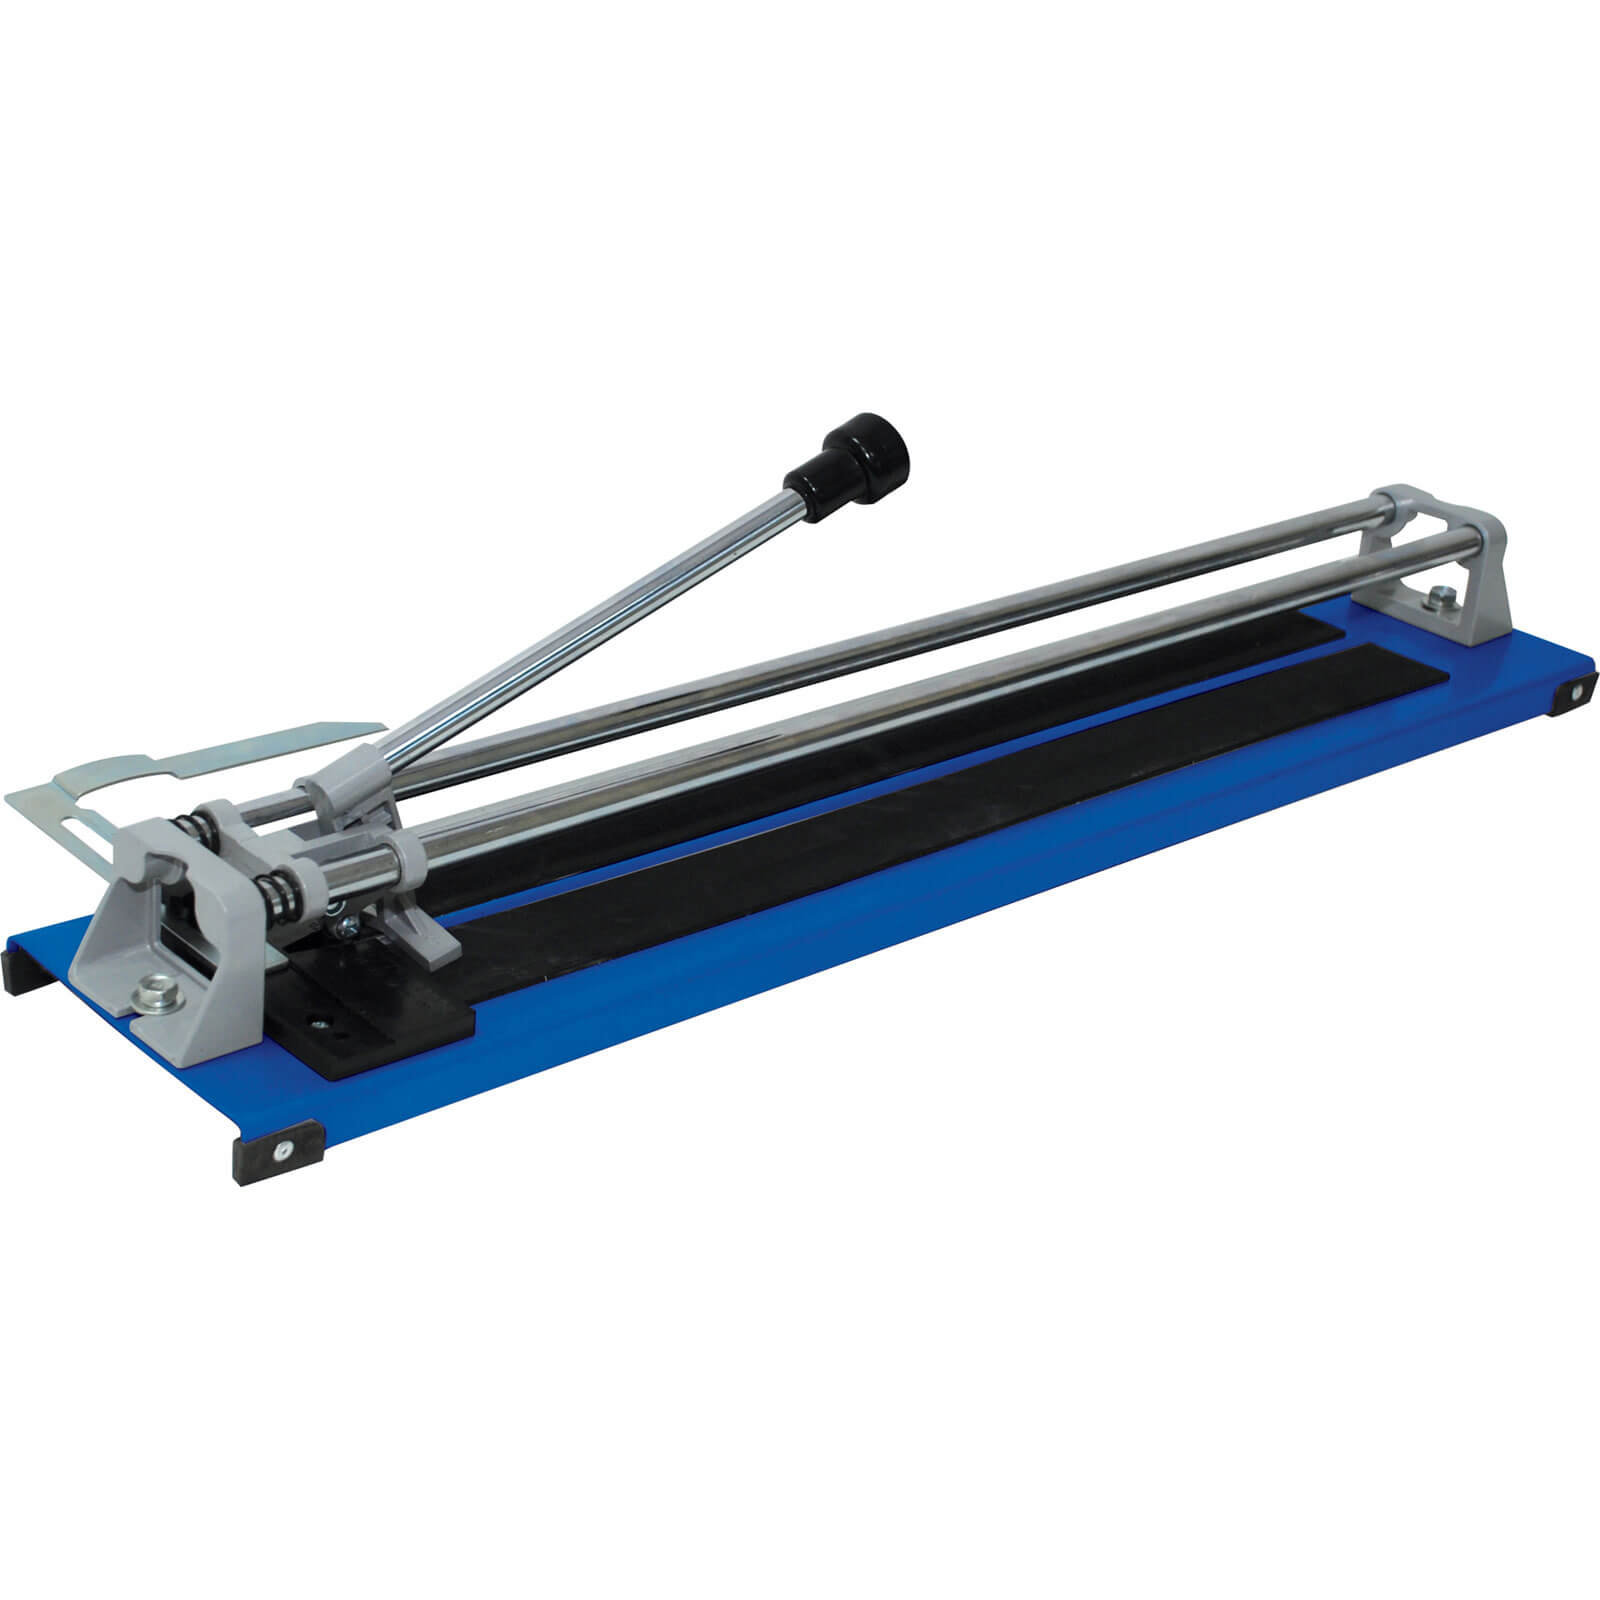 Photo of Vitrex Manual Flat Bed Tile Cutter